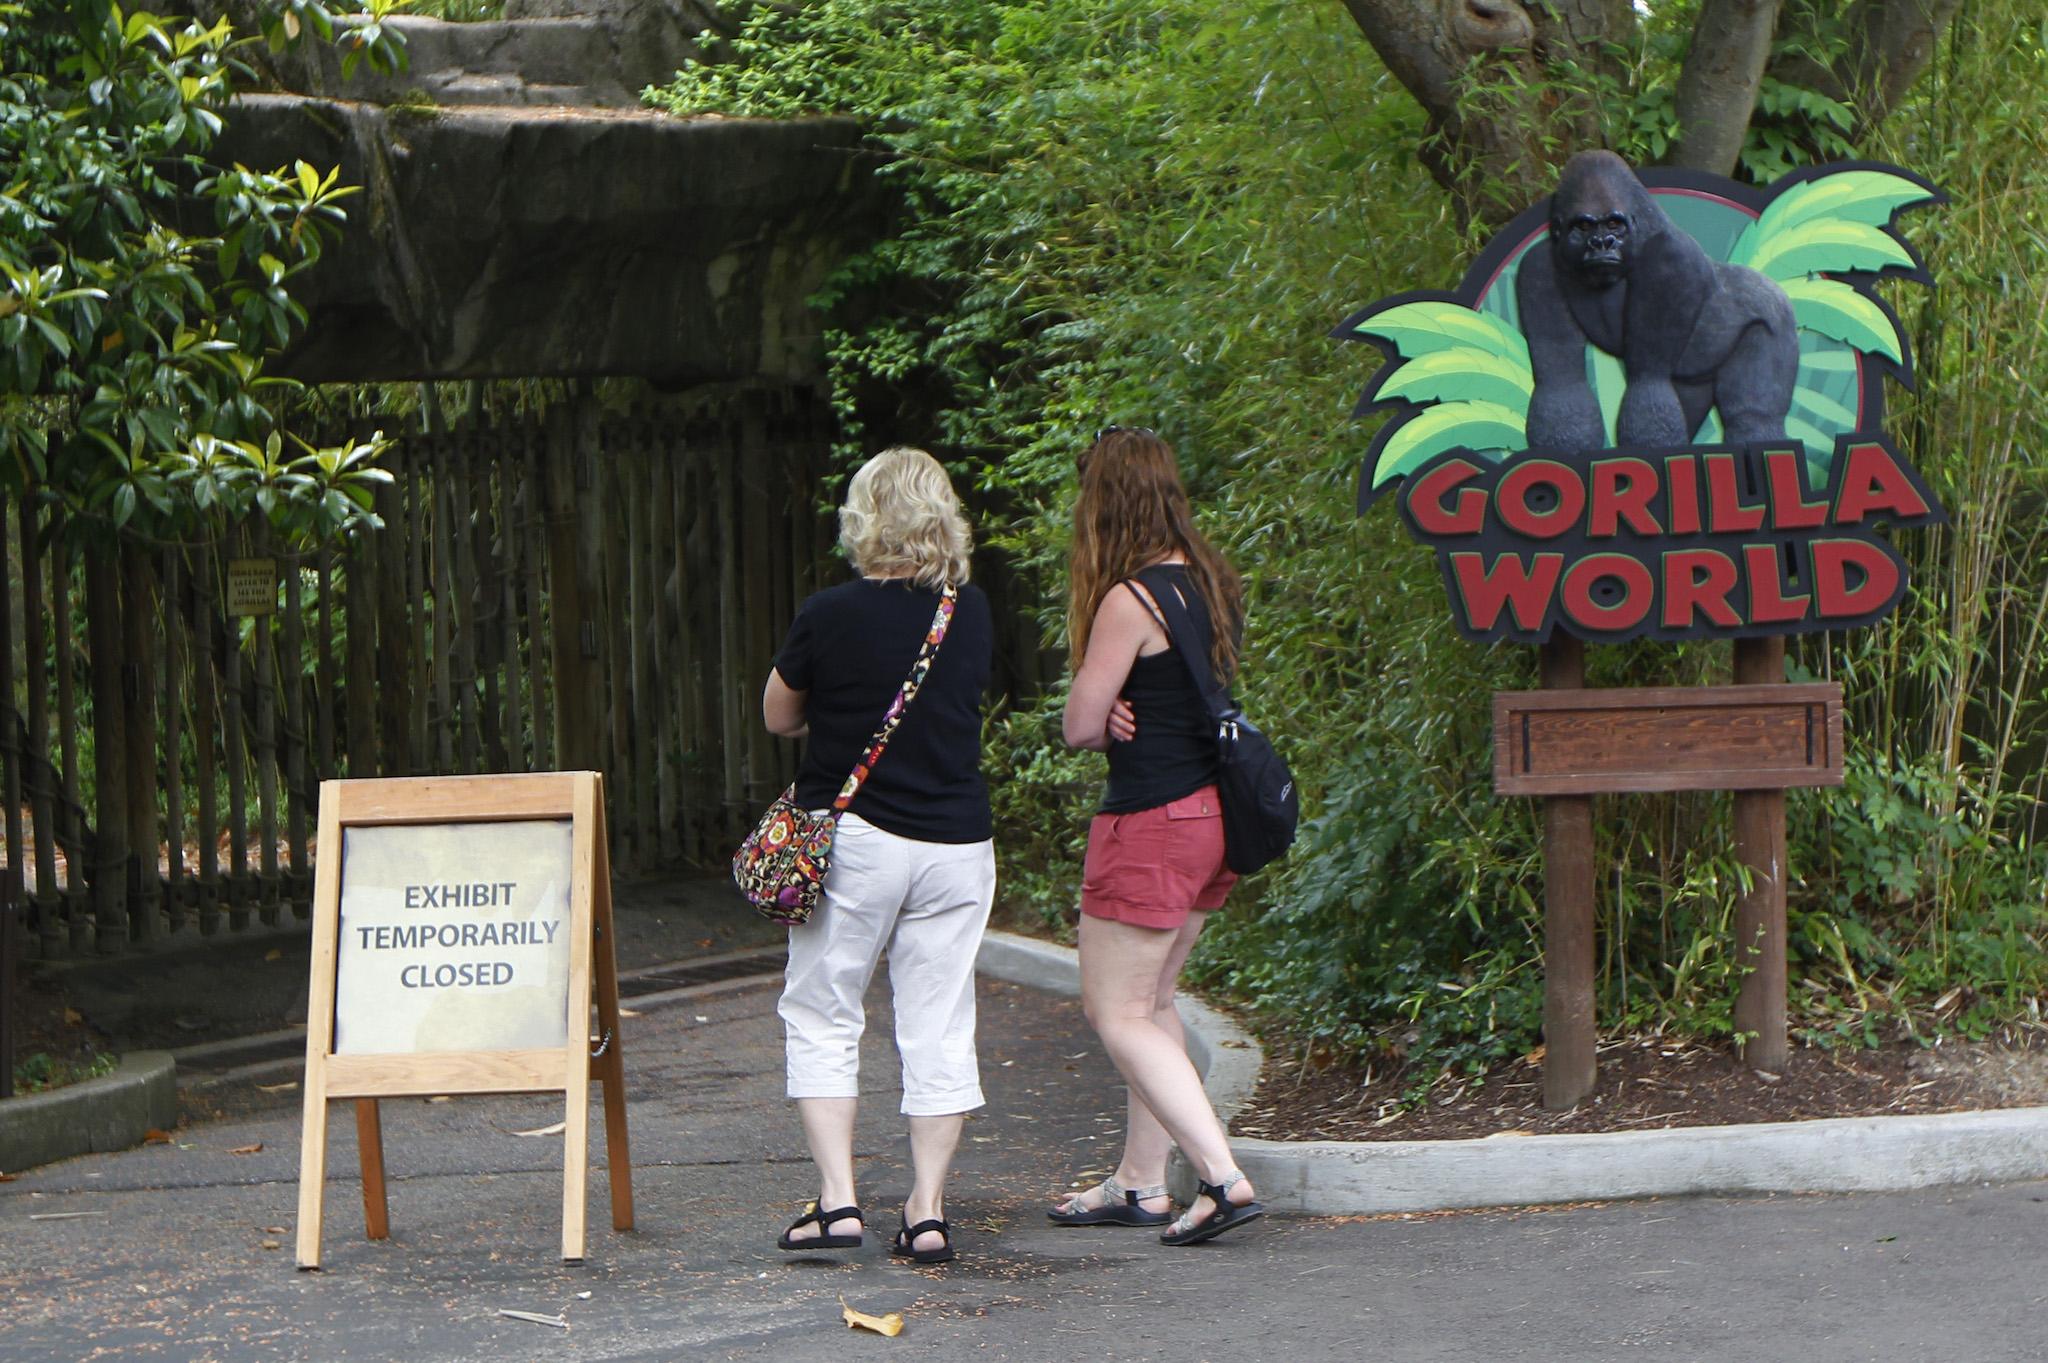 Visitors walk past the closed main entrance to the Cincinnati Zoo's Gorilla World exhibit days after a 3-year-old boy fell into the moat and officials were forced to kill Harambe